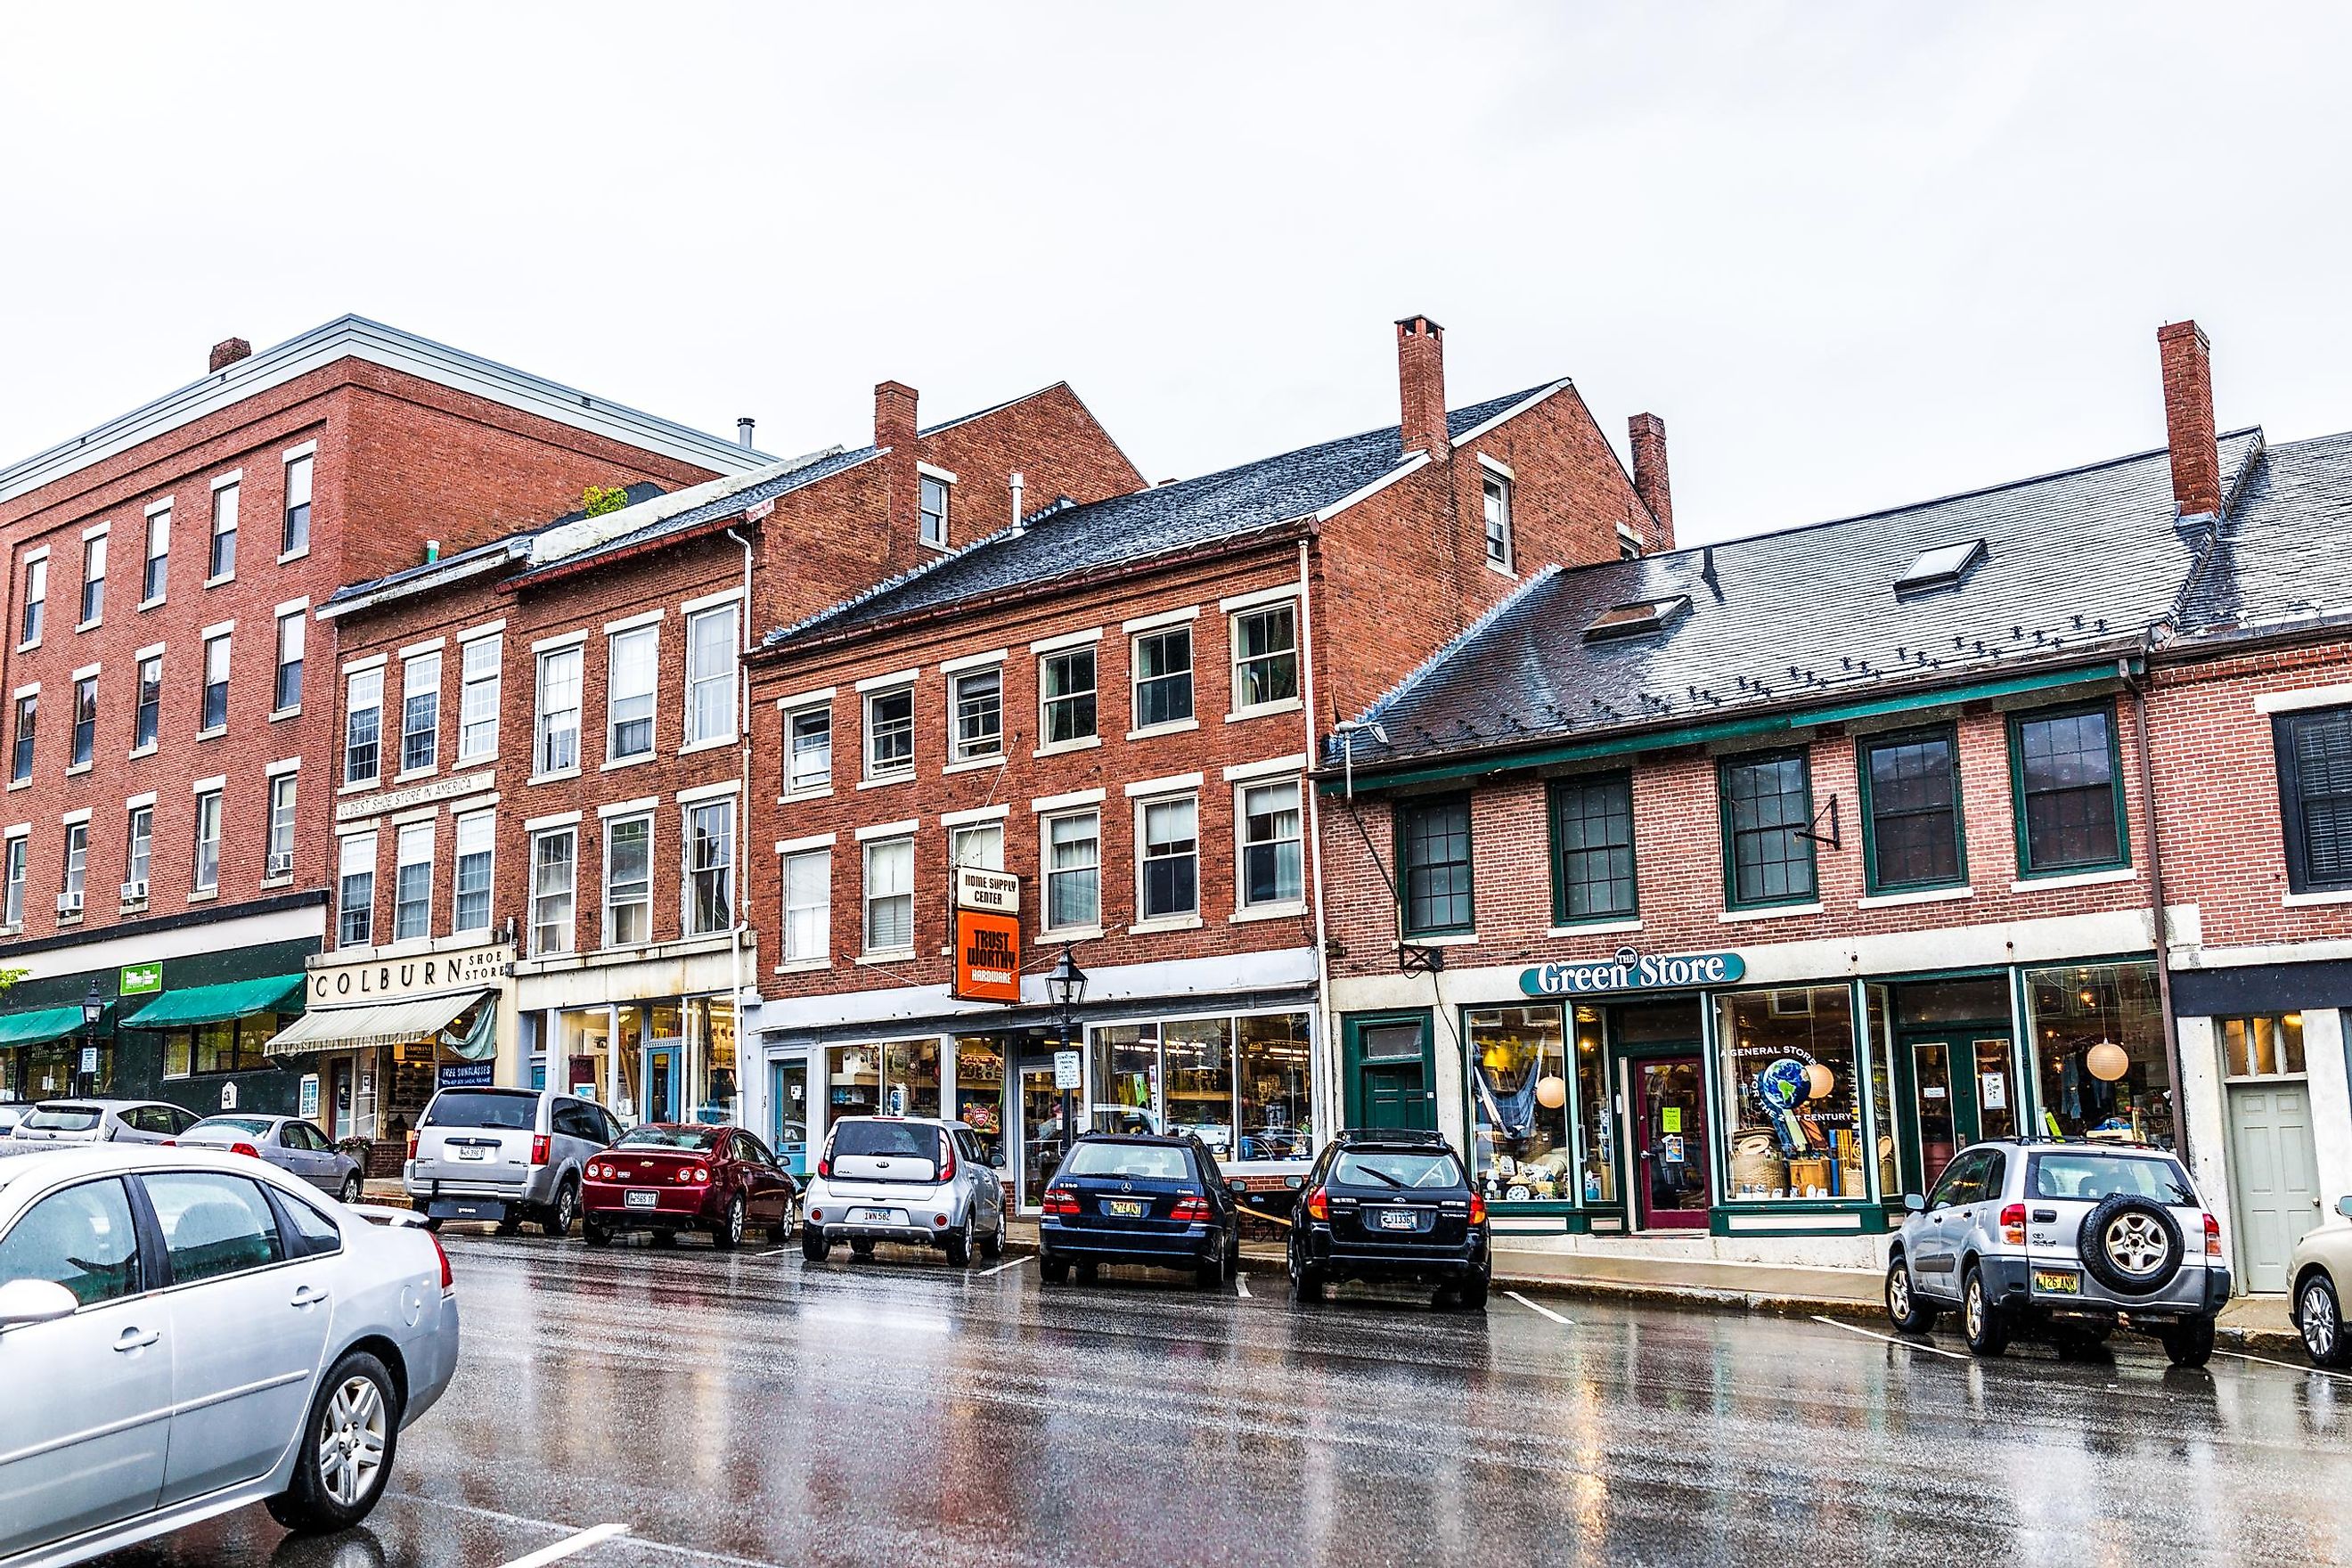 Businesses lined along the steep hill Main Street in Belfast, Maine. Editorial credit: Kristi Blokhin / Shutterstock.com